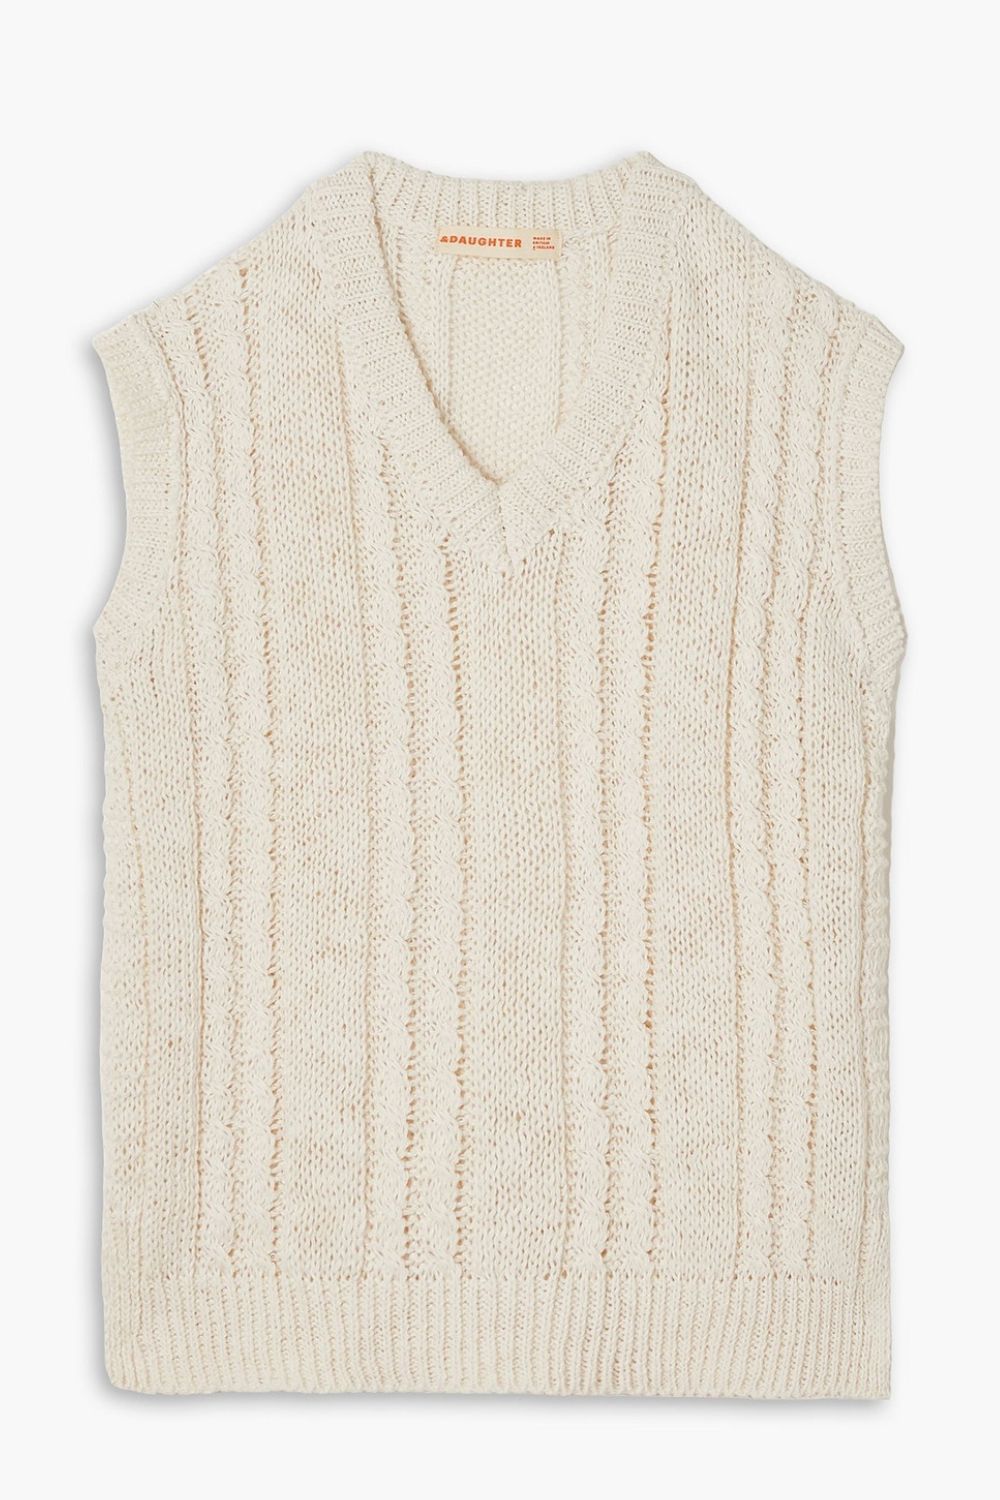 The-Gloss-Magazine-best-knits-for-January-7